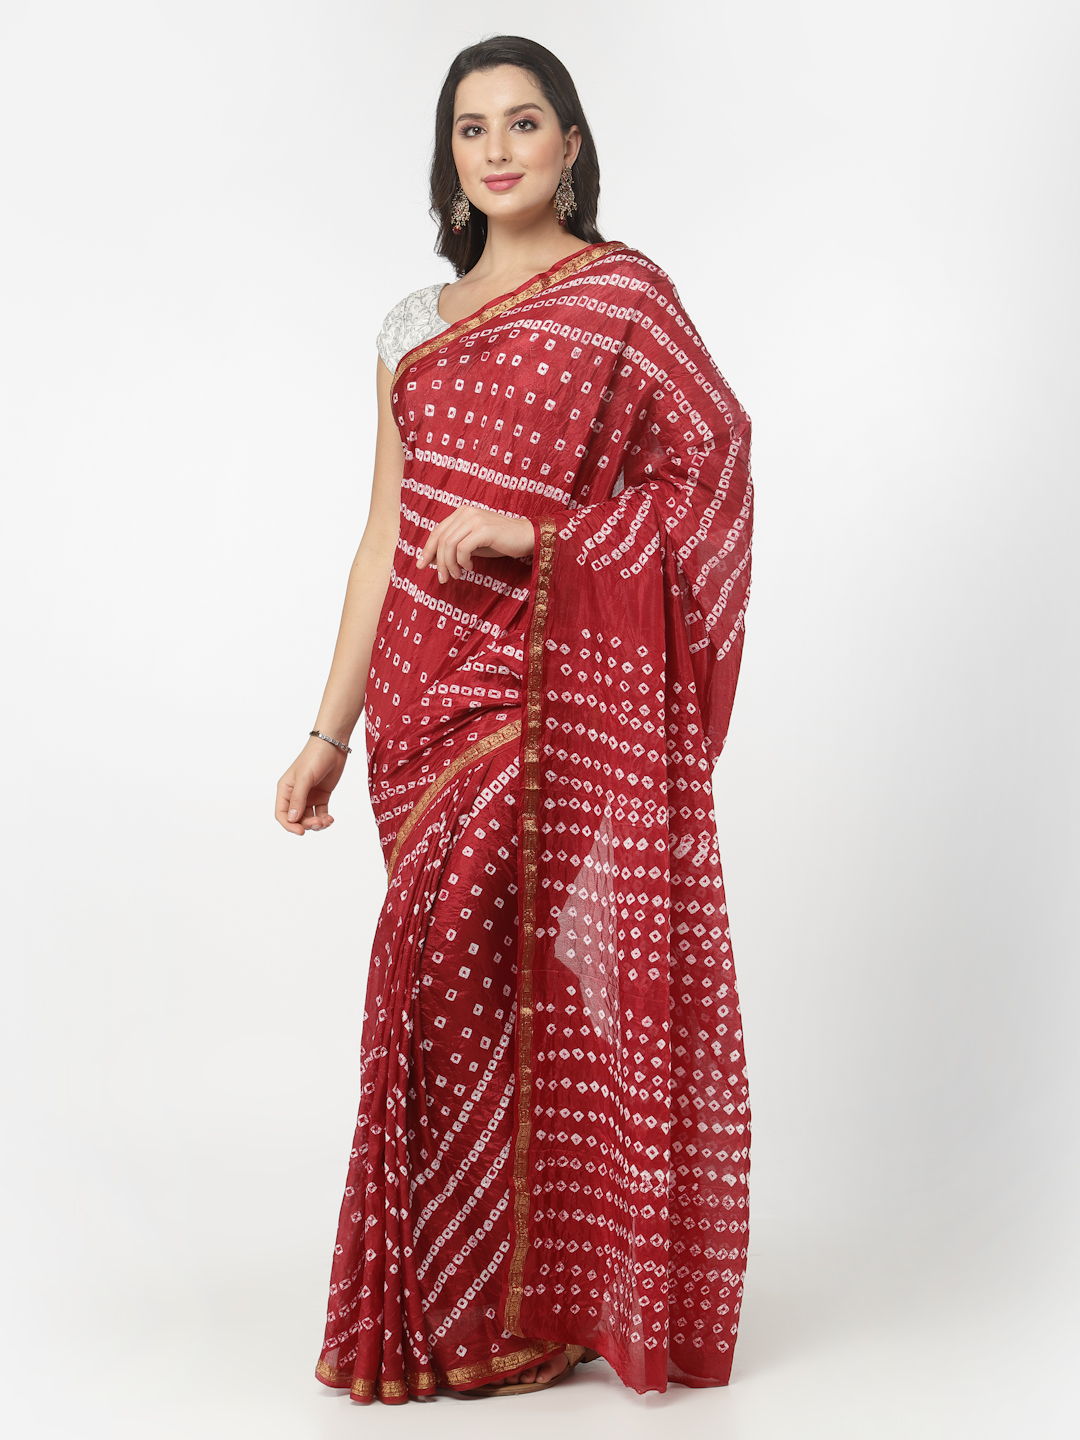 Silk Bandhani and Zari Weaving Saree with Unstitched Blouse - Maroon And White